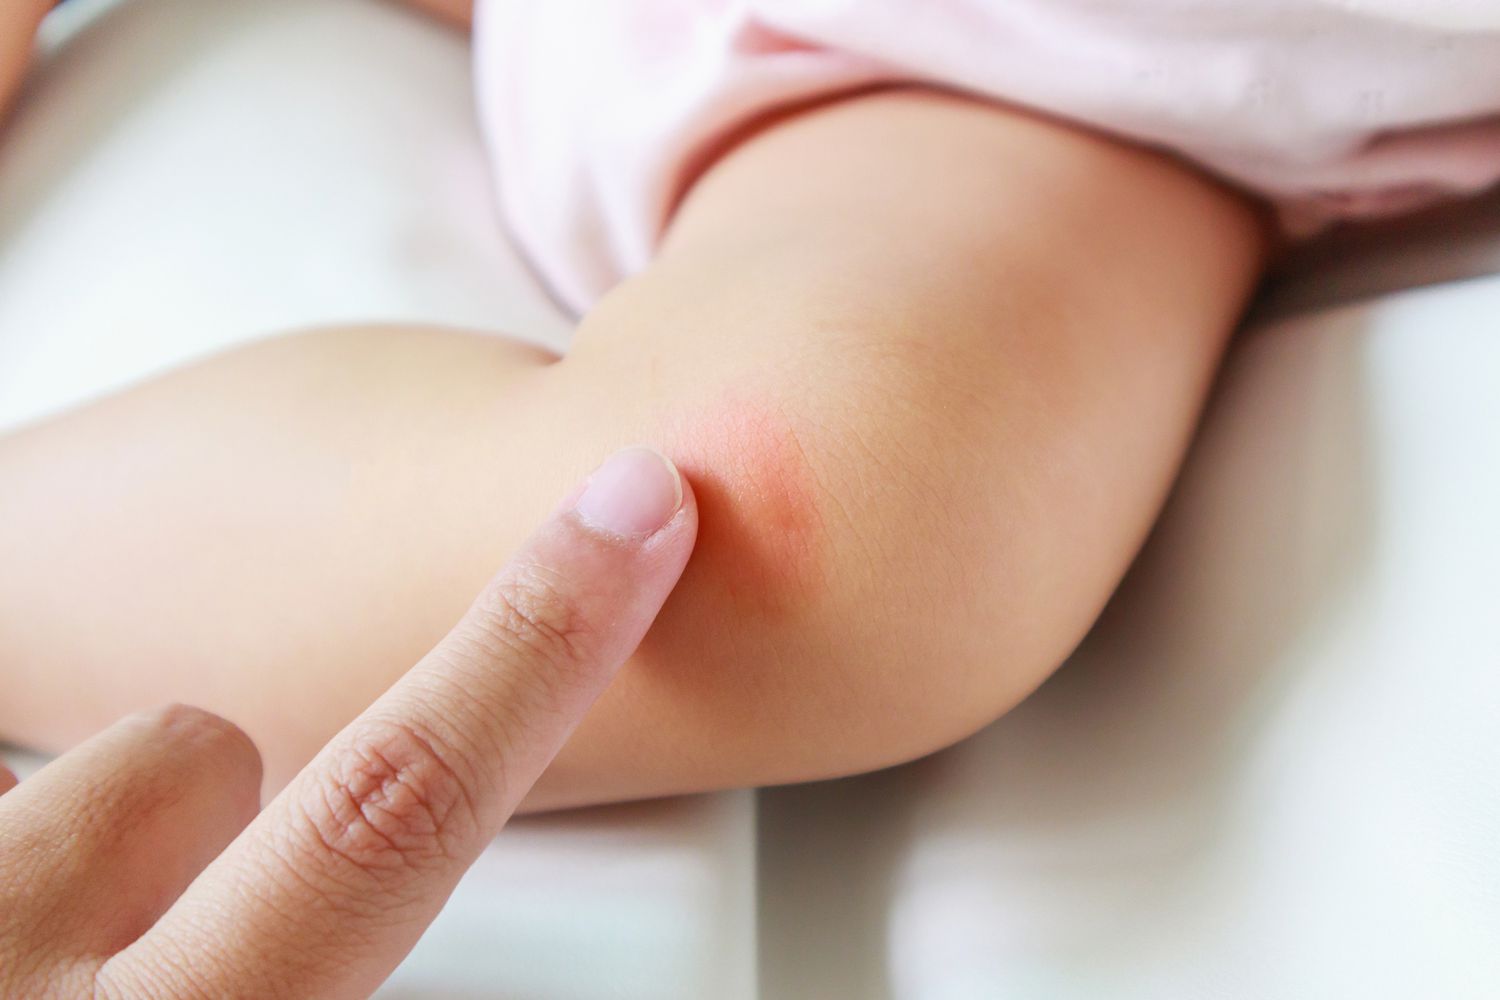 Skin Rash Treatment How To Stop The Itch Parents